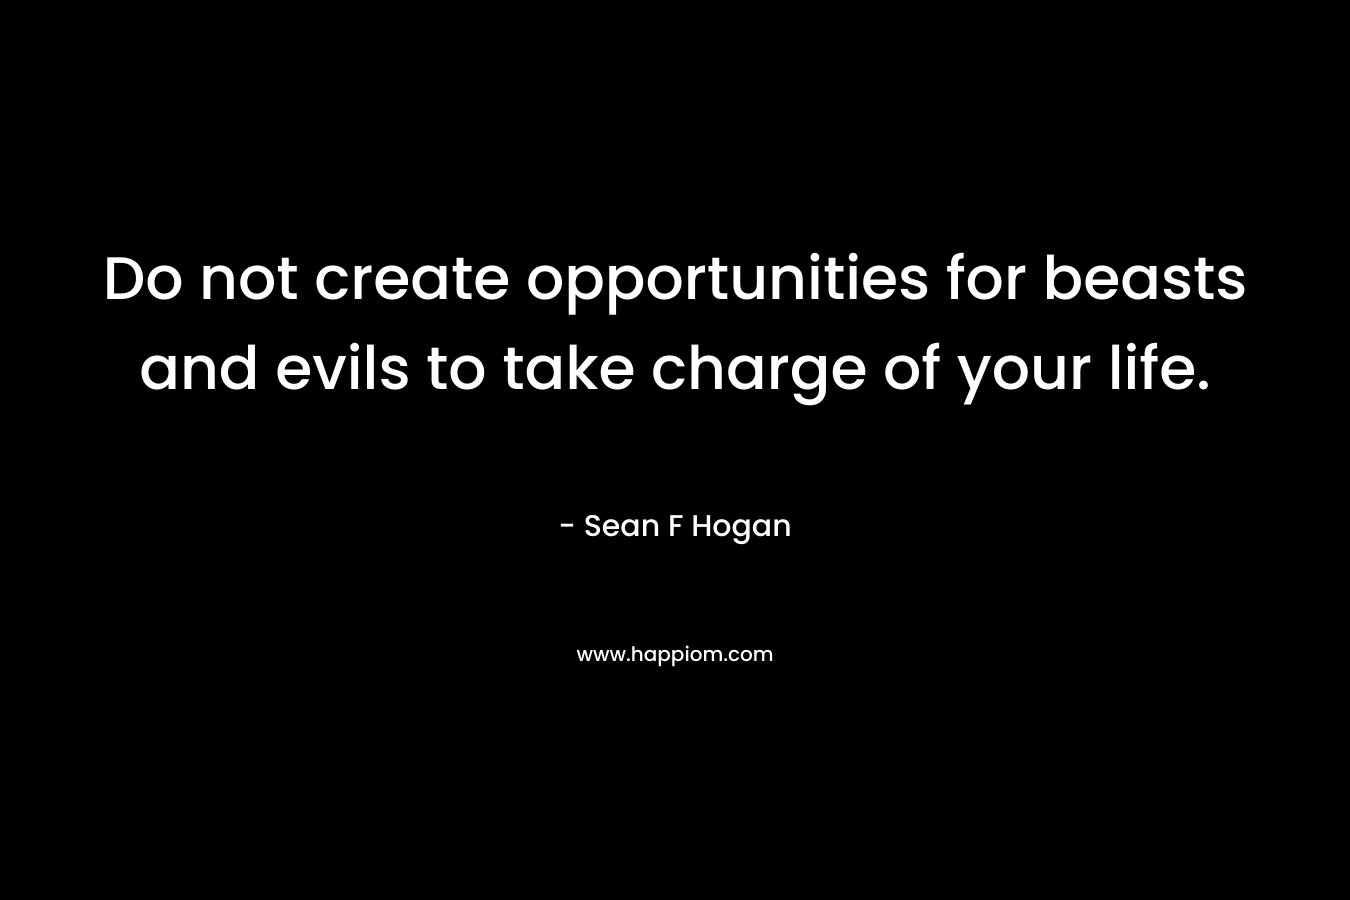 Do not create opportunities for beasts and evils to take charge of your life. – Sean F Hogan